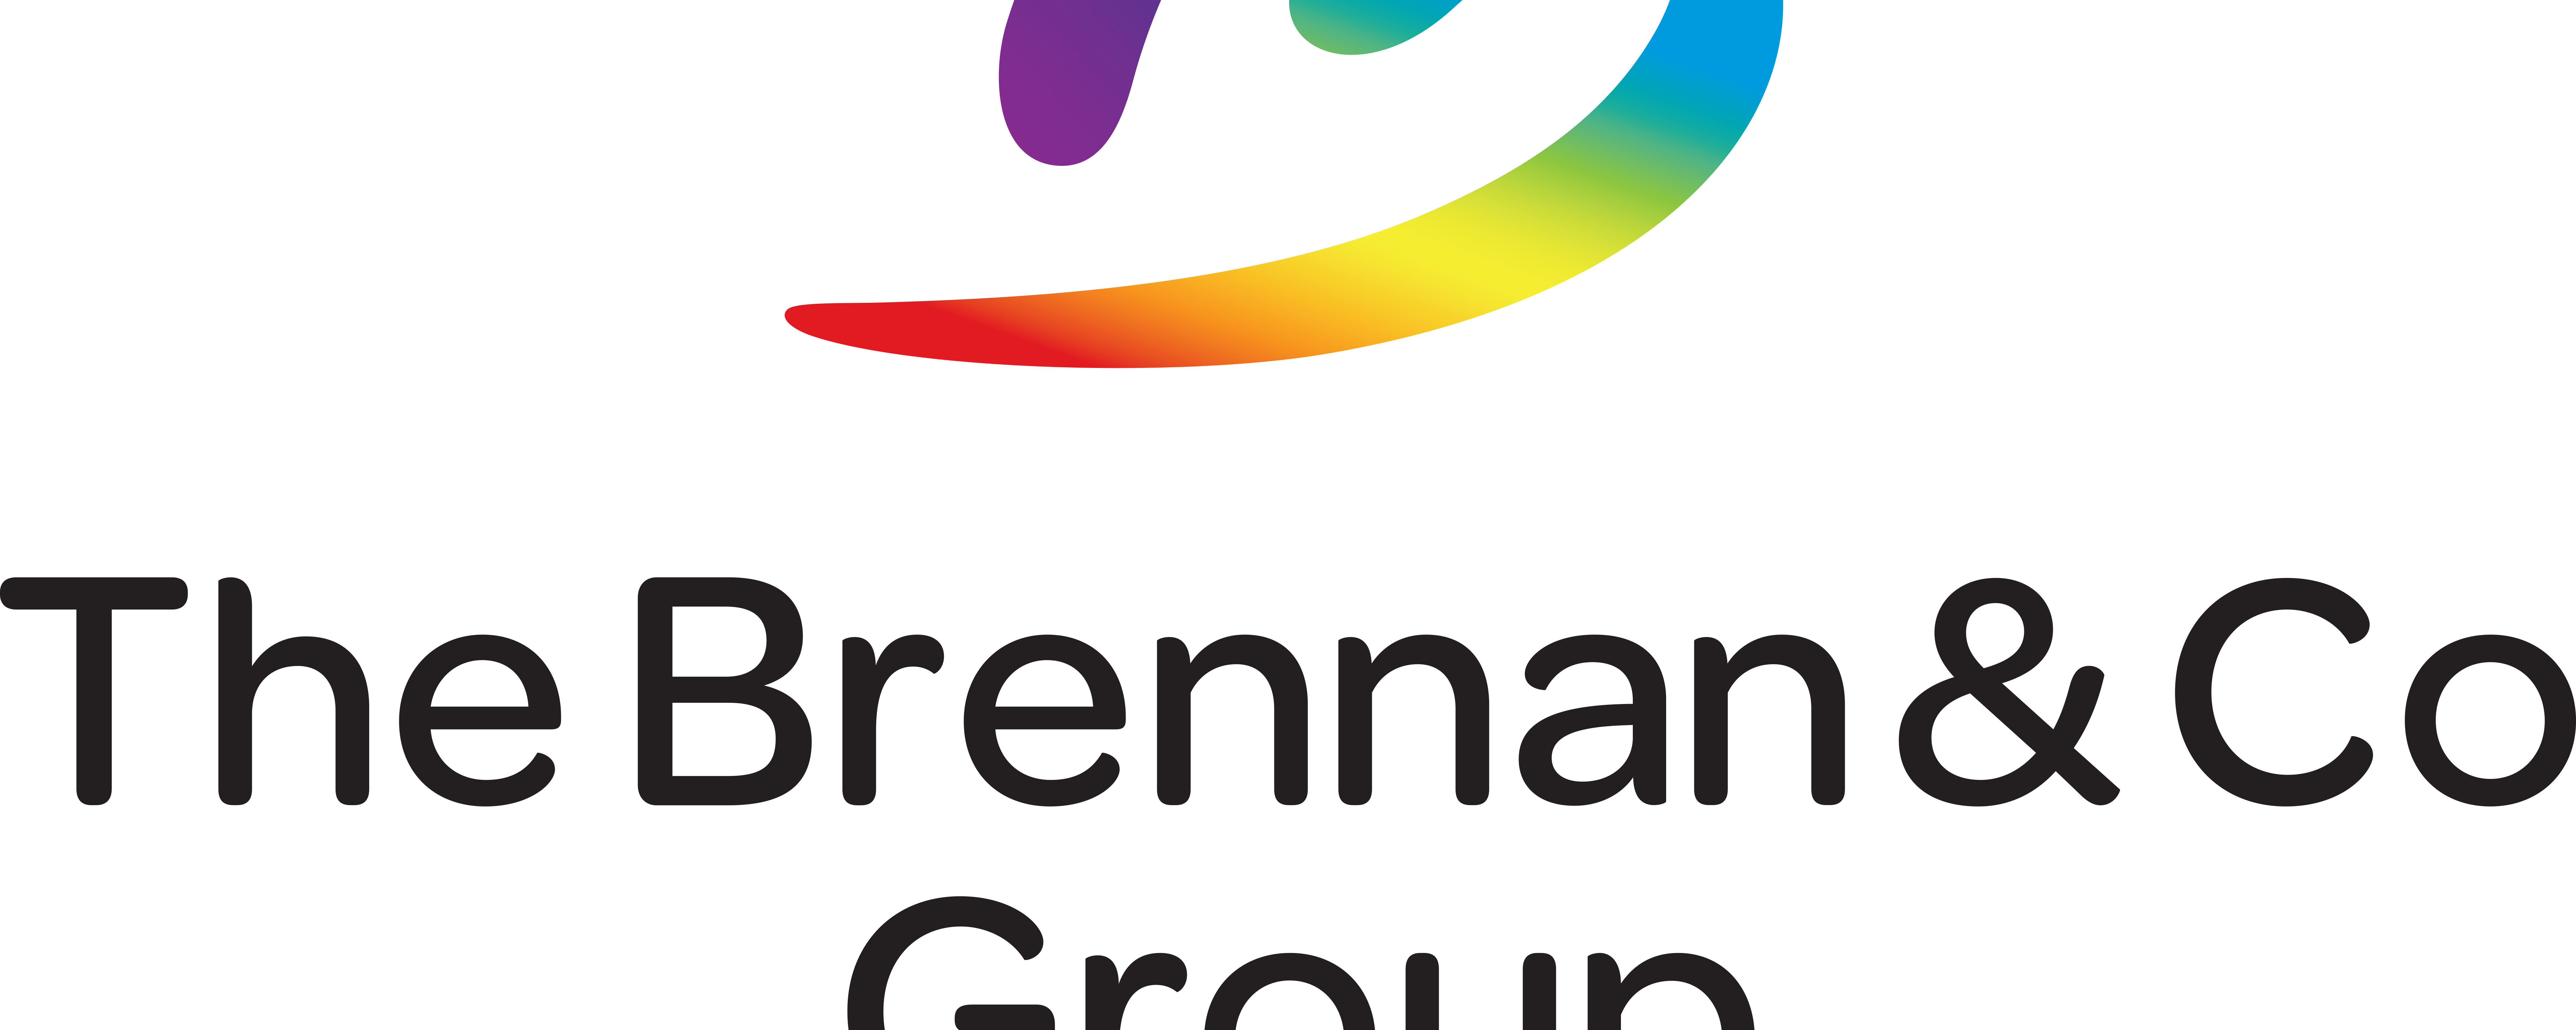 PDI International Appoints The Brennan & Co Group Exclusive Distributor in Ireland